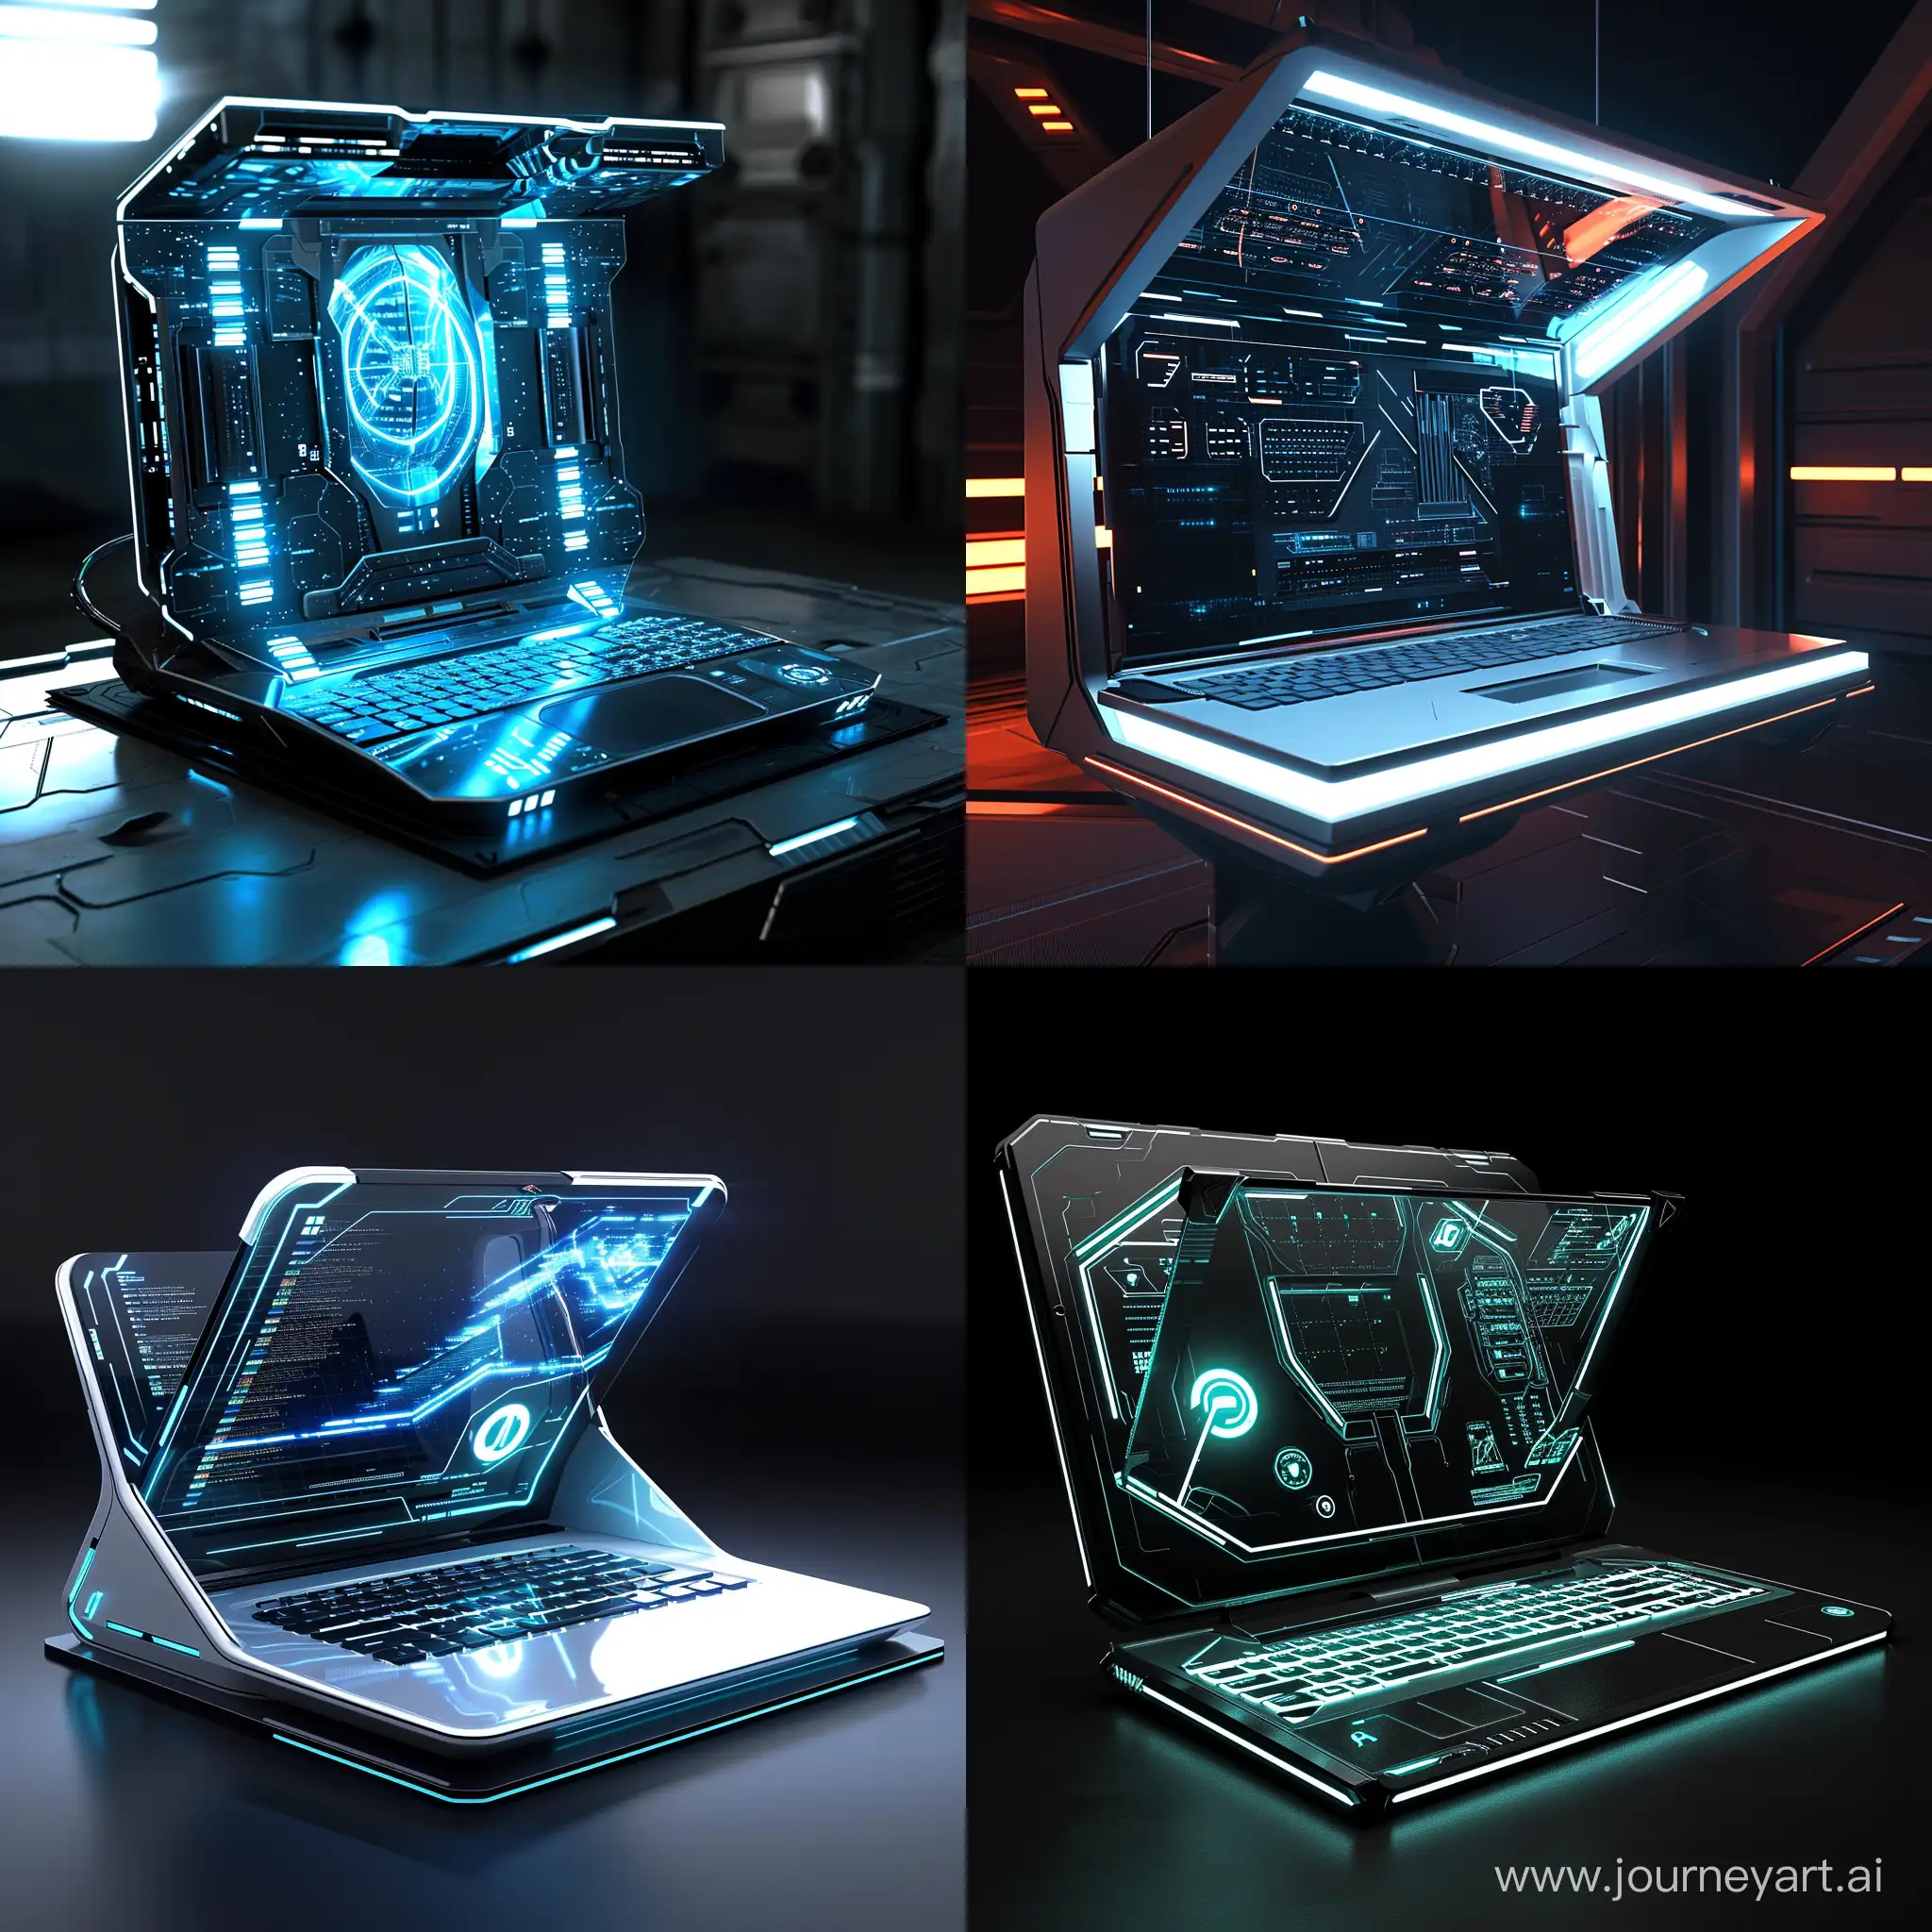 Futuristic-Laptop-with-Impossible-Shapes-SciFi-Art-on-ArtStation-and-DeviantArt